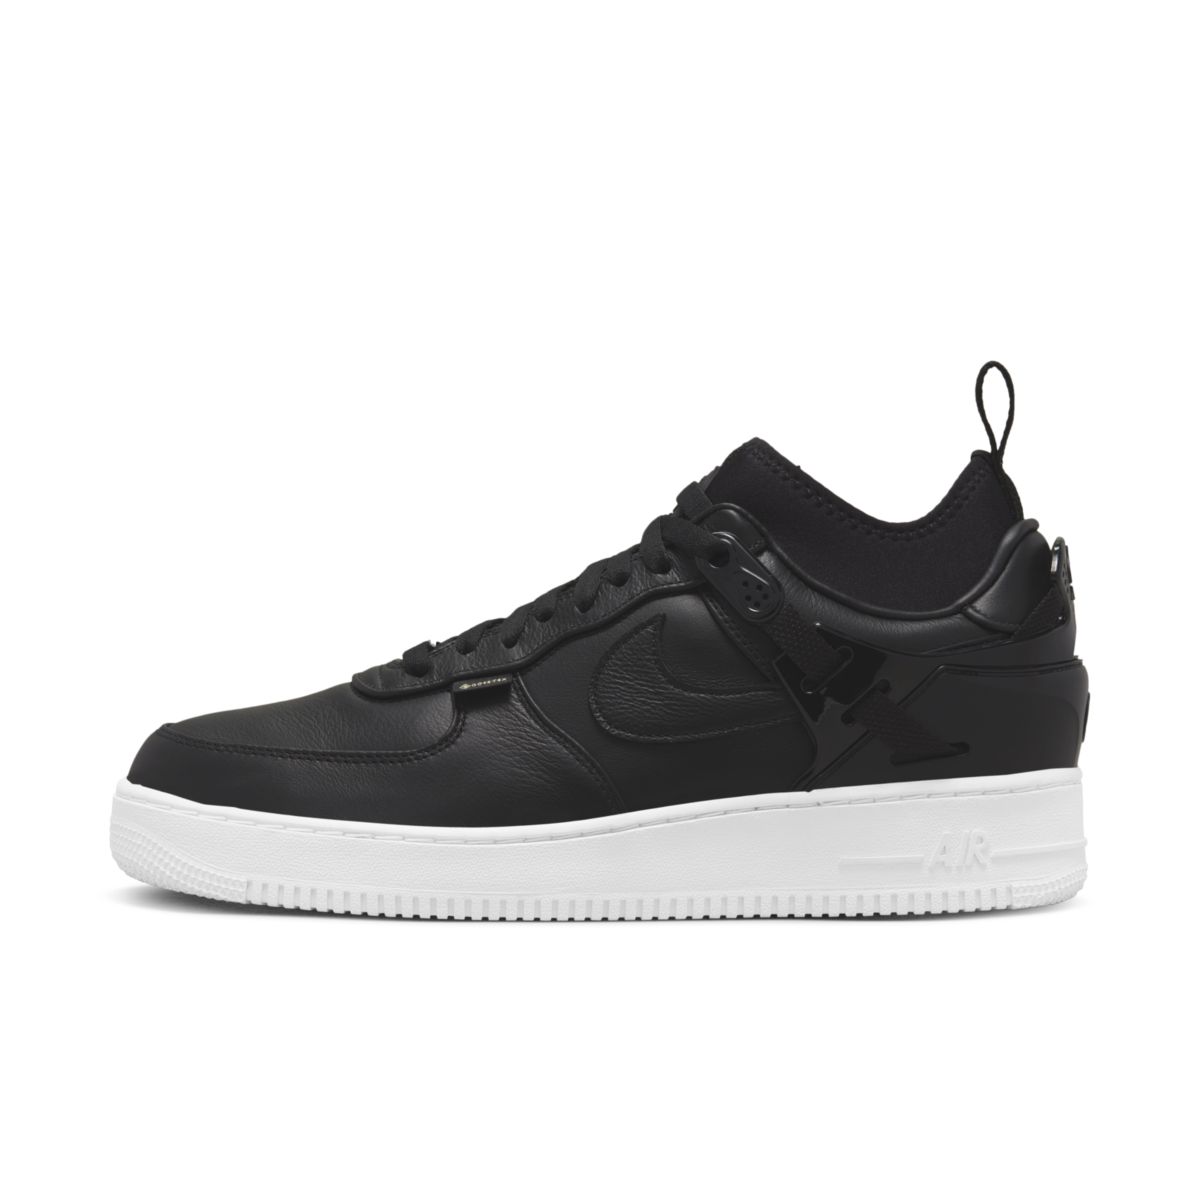 Undercover x Nike Air Force 1 Low Black DQ7558-002 2